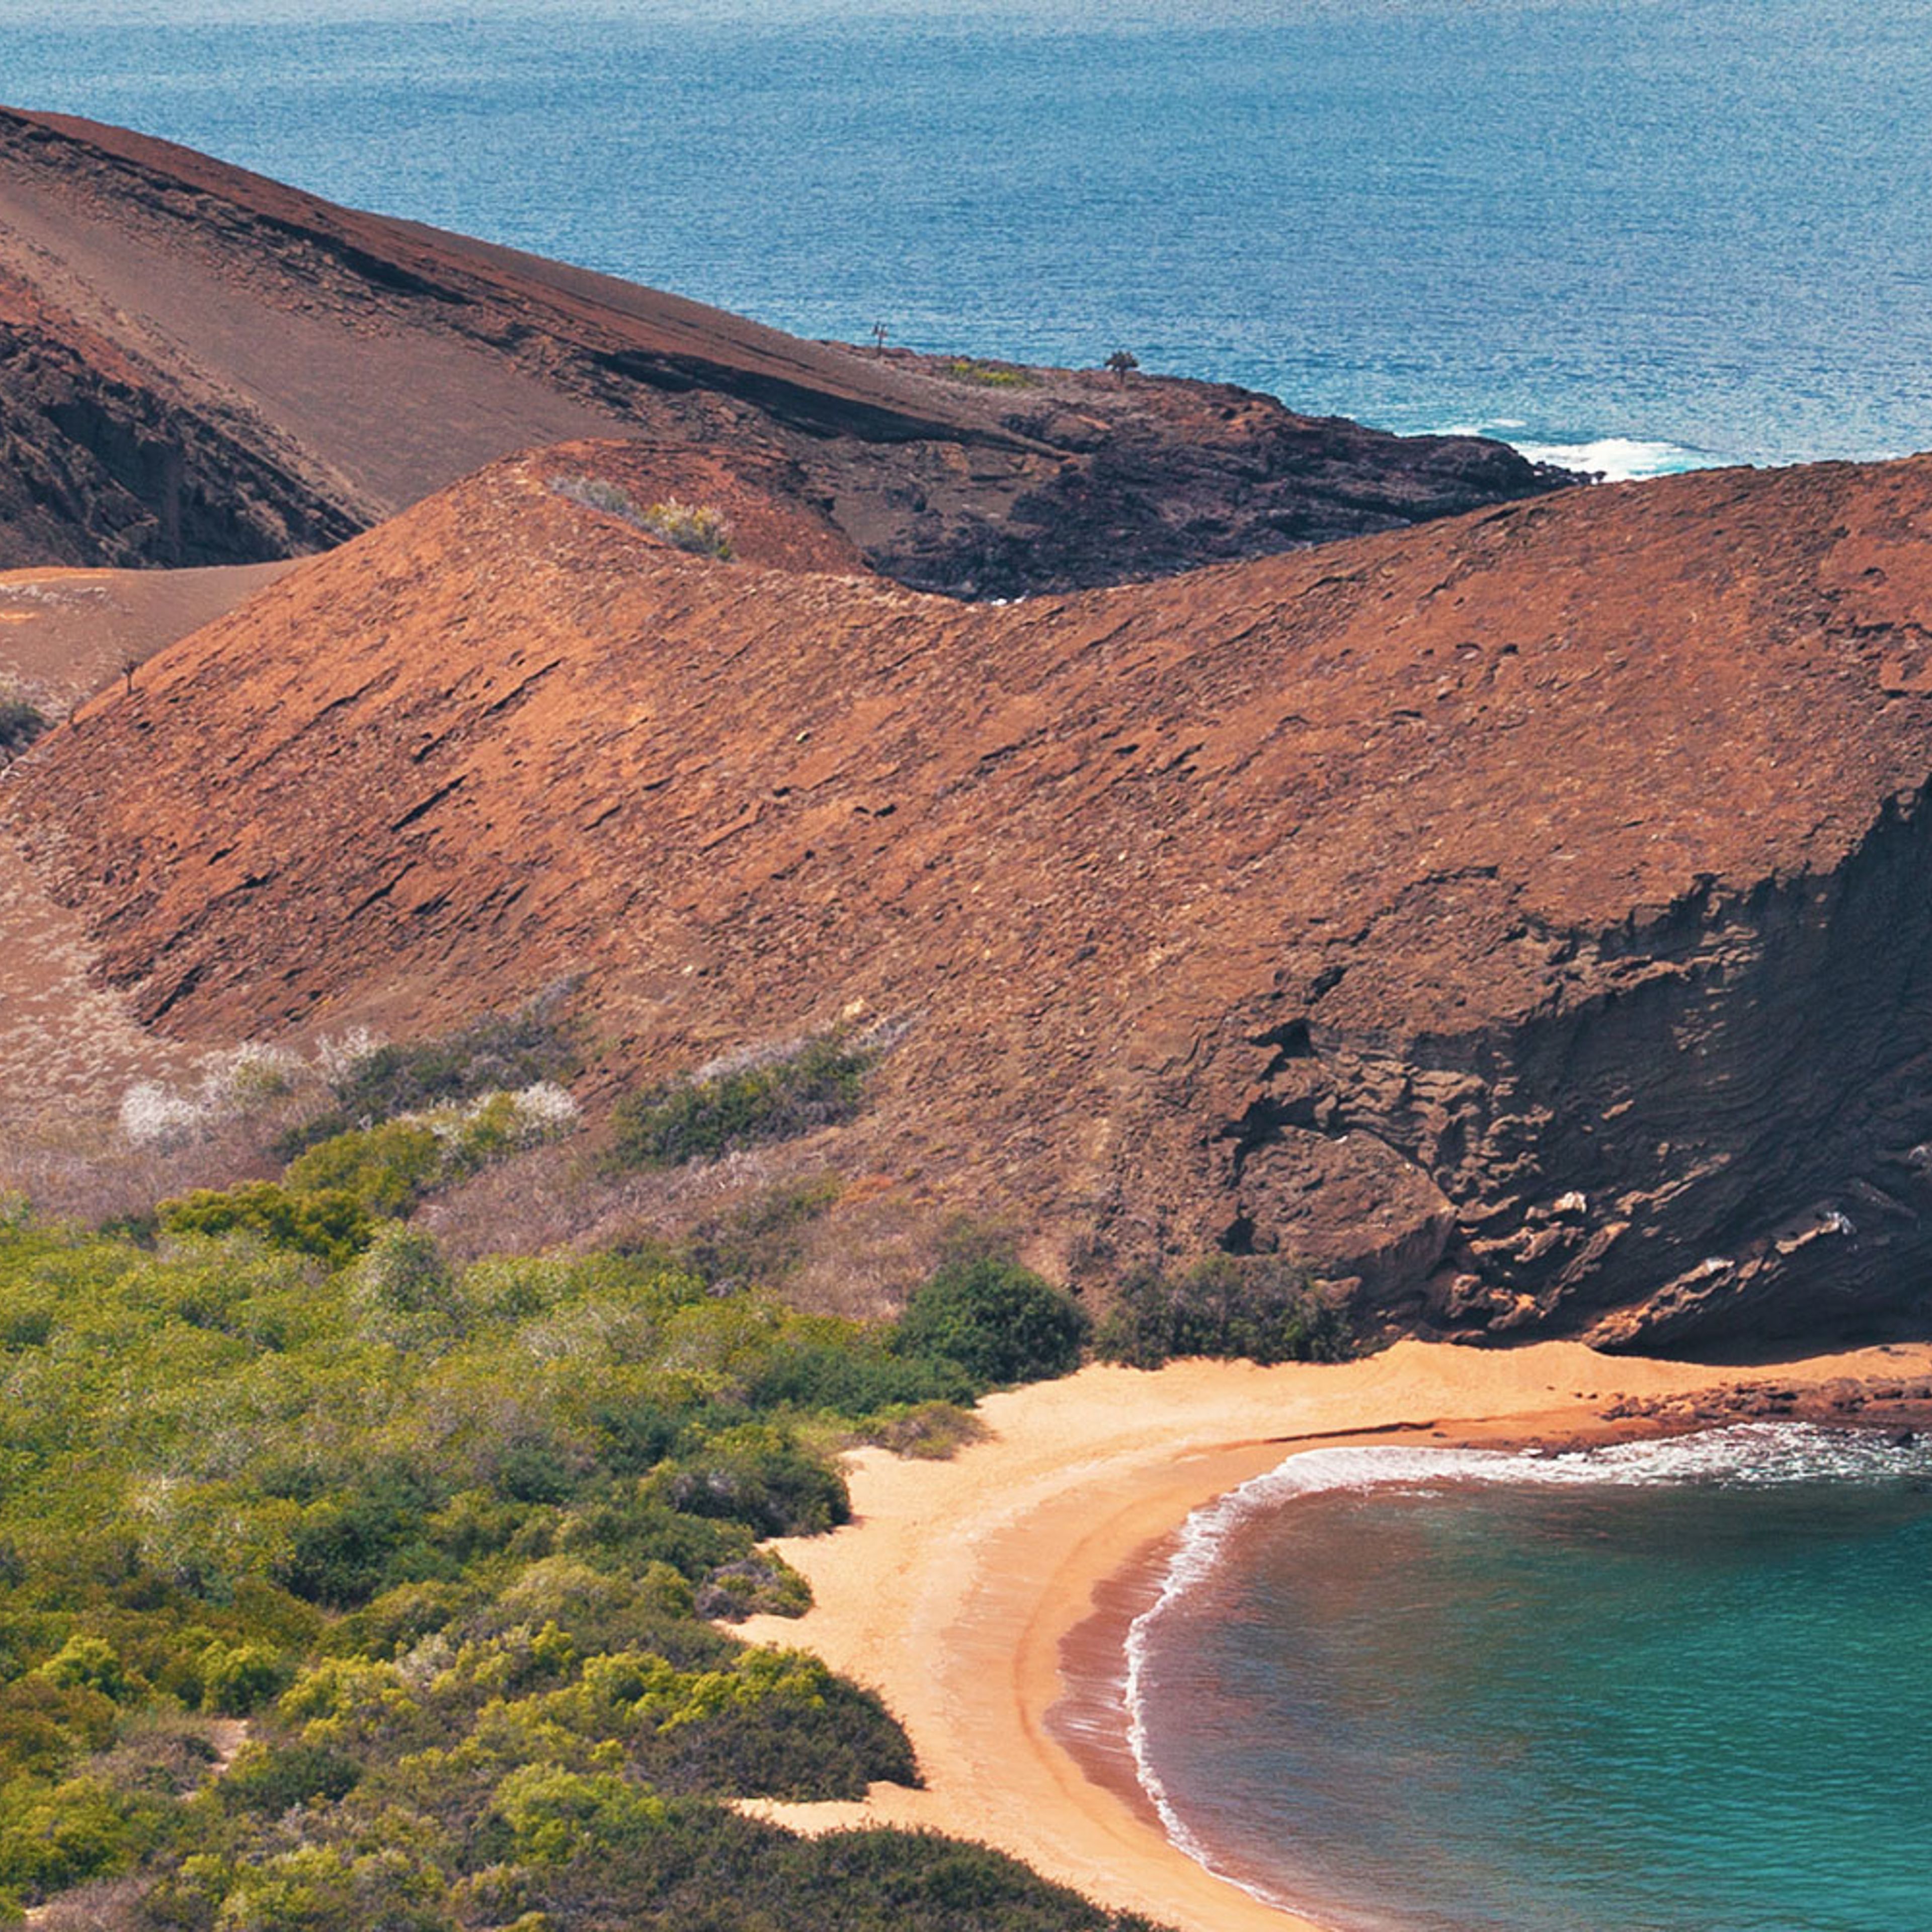 Island-hopping in the Galapagos